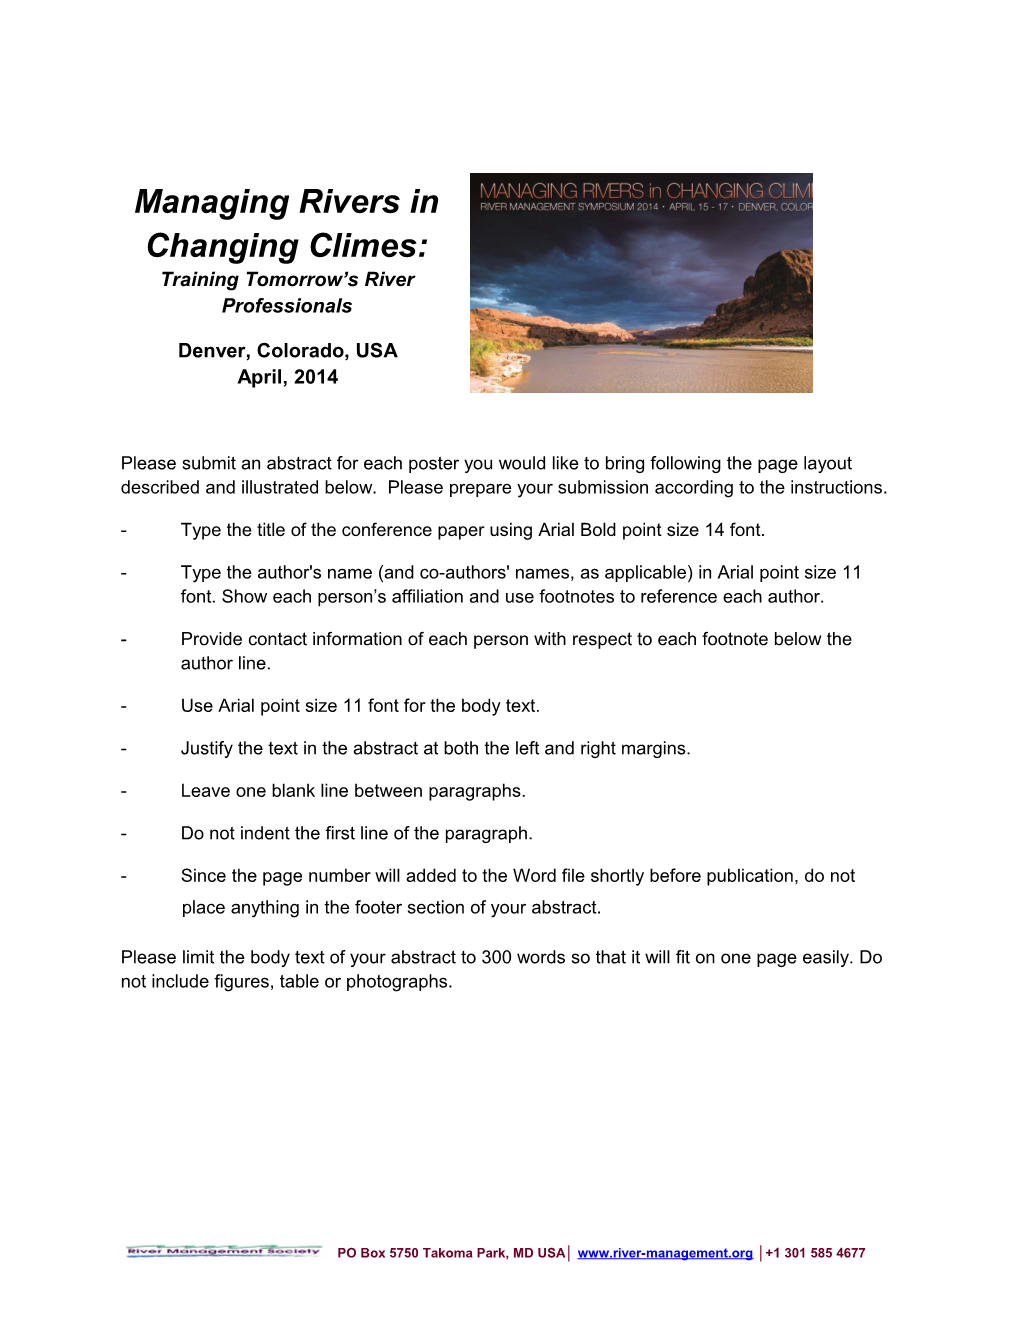 Managing Rivers in Changing Climes: Training Tomorrow S River Professionals